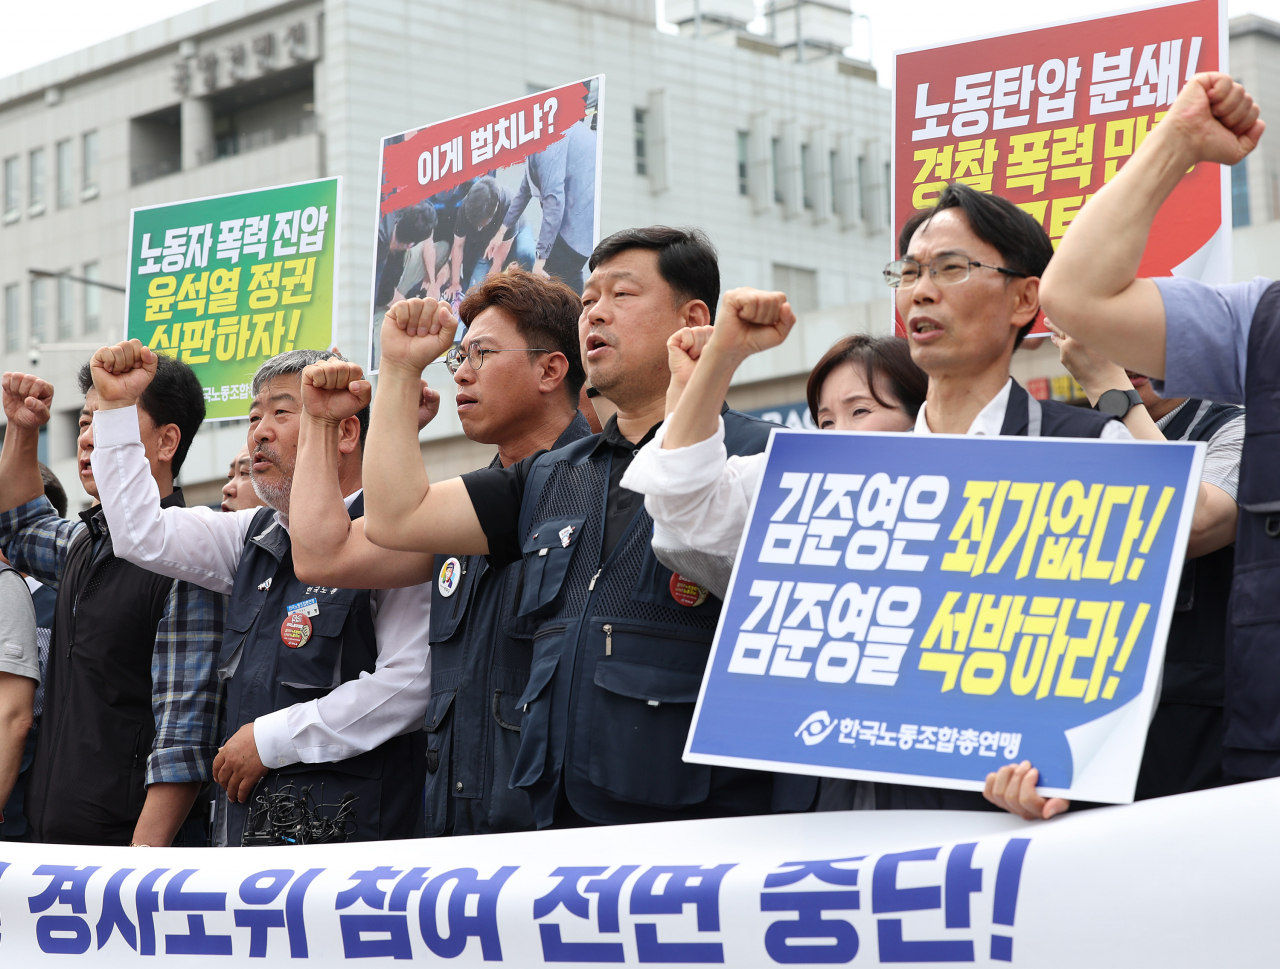 The chief of the Federation of Korean Trade Unions, Kim Dong-myung (second from left), and union members chant during a press conference held in front of the presidential office in Yongsan, Seoul, Thursday. (Yonhap)